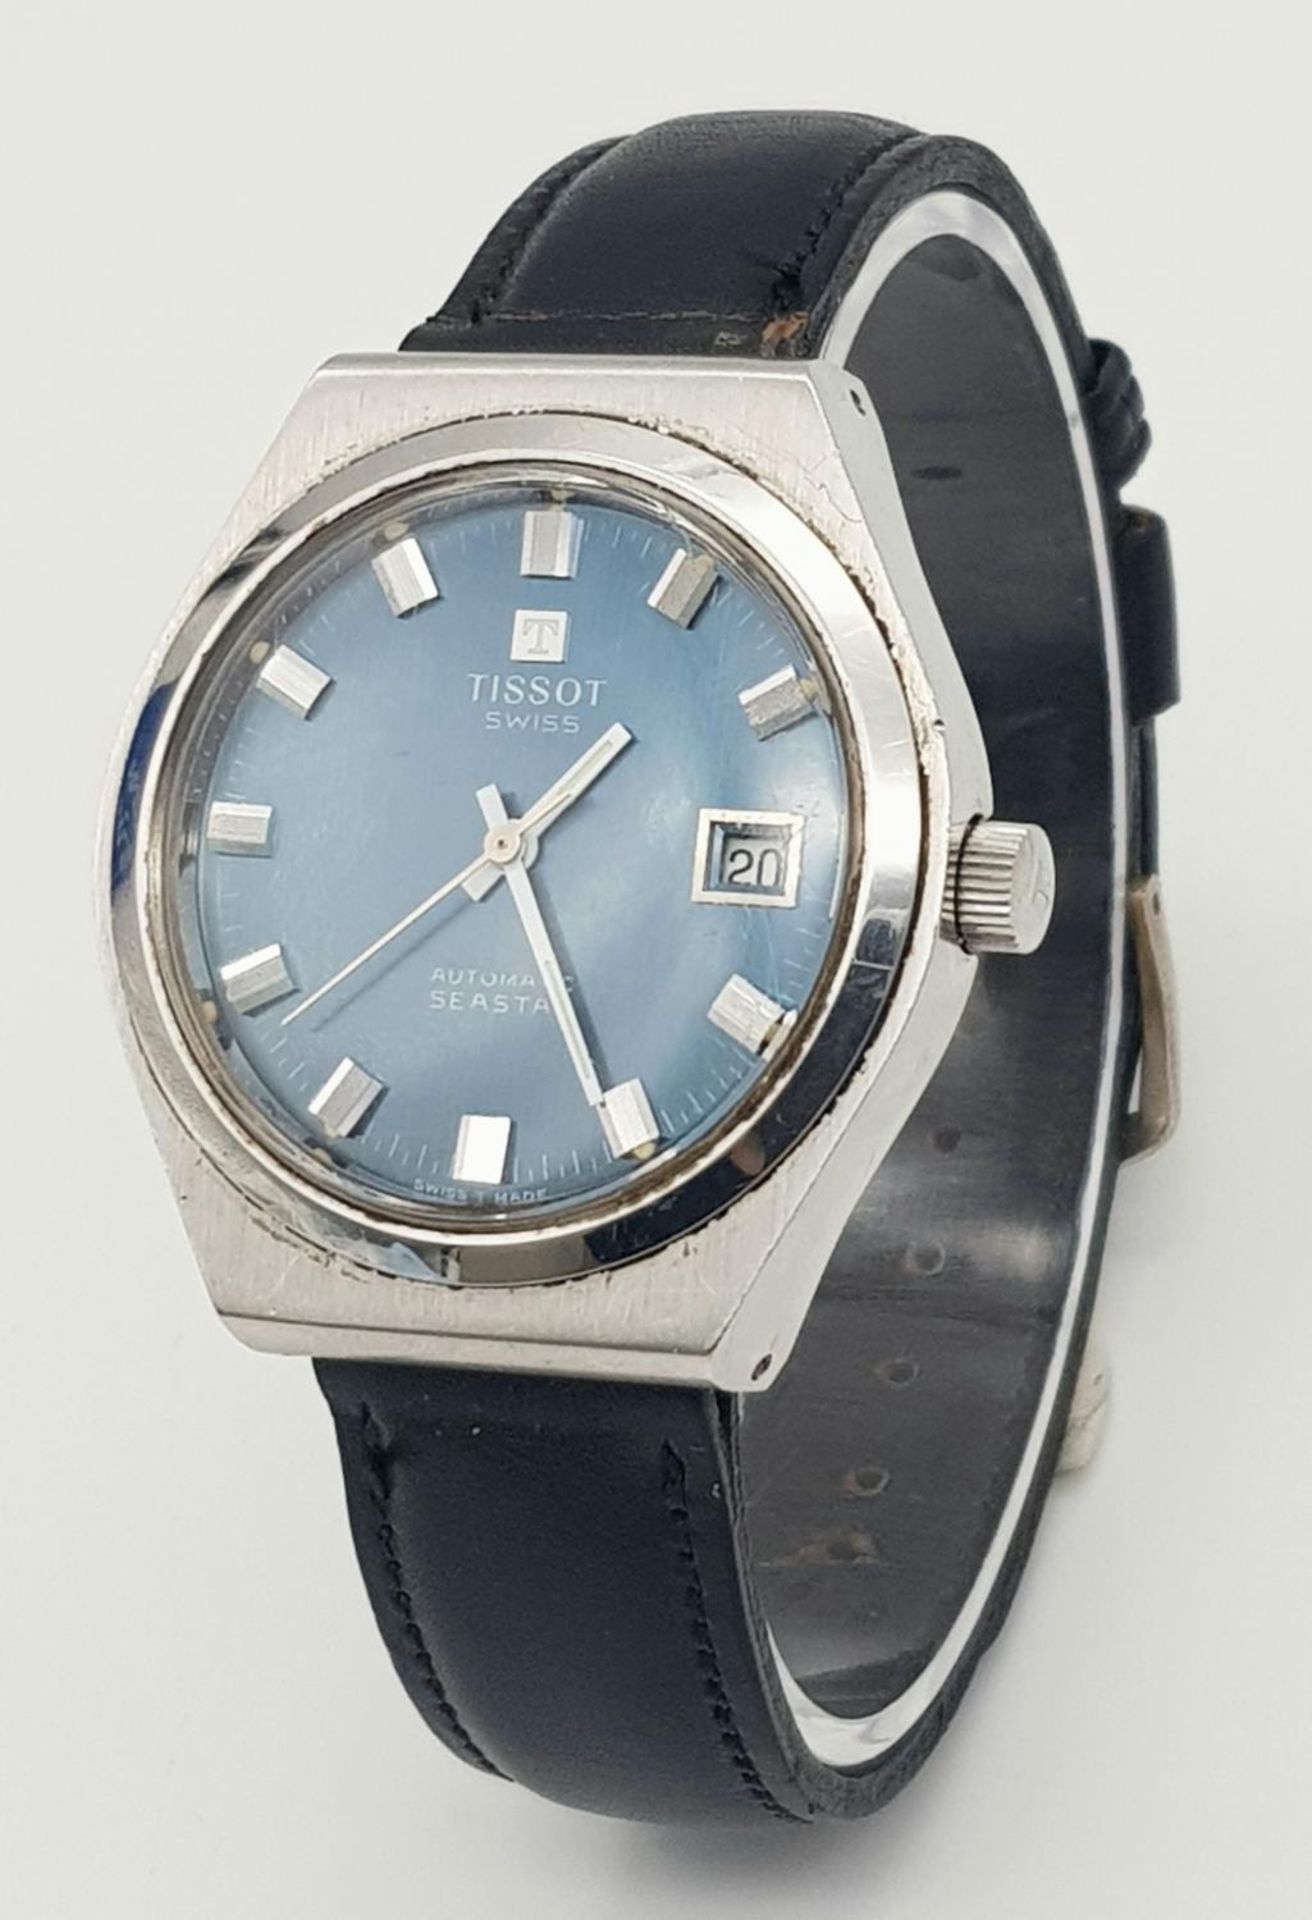 A Vintage Tissot Automatic Gents Watch. Black leather strap. Stainless steel case - 37mm. Blue